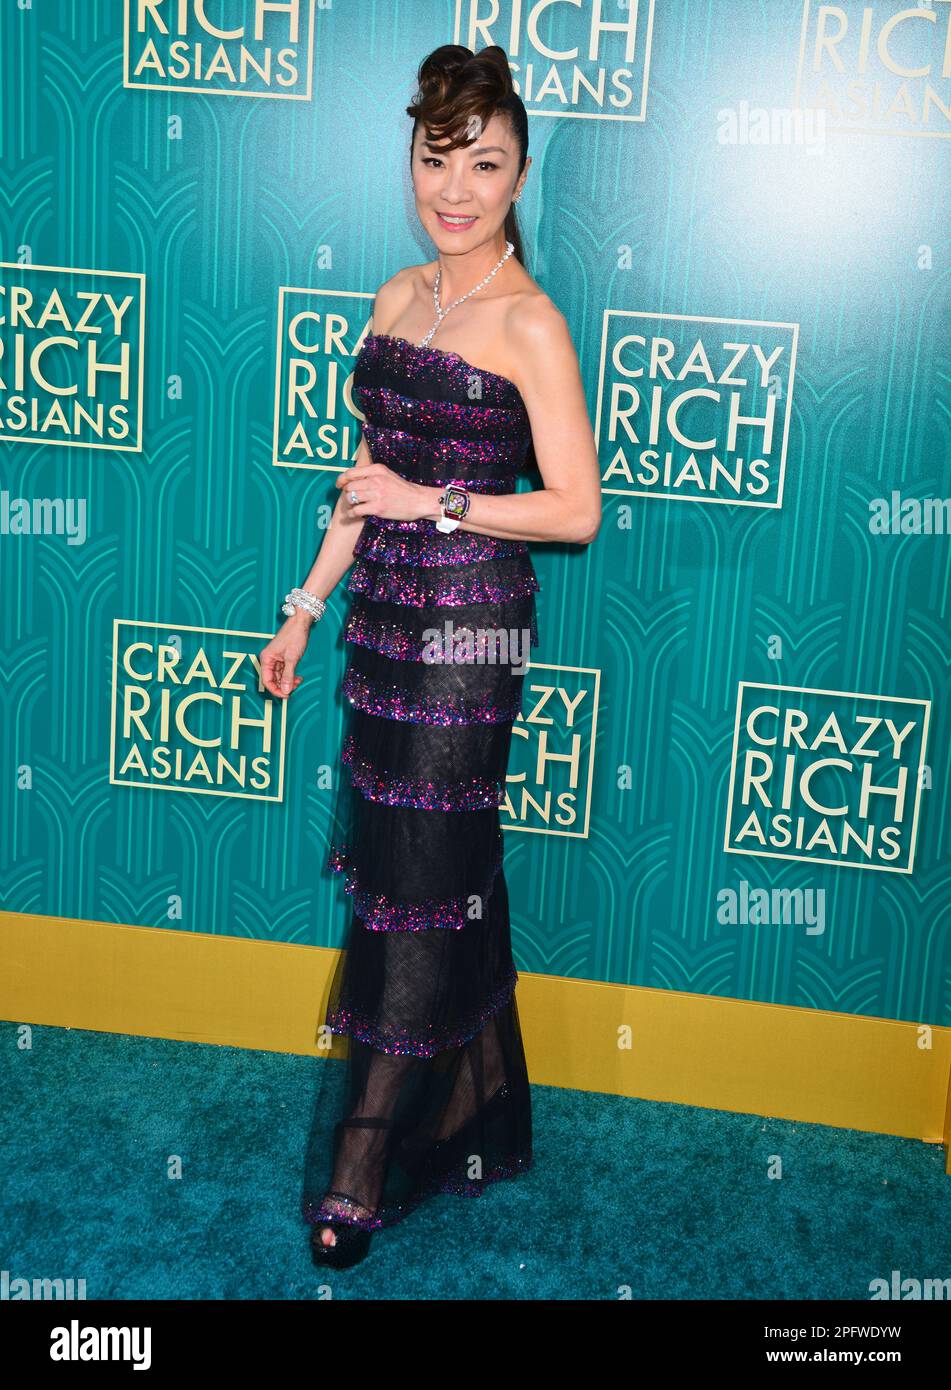 Michelle Yeoh 101 arrives at the Warner Bros. Pictures' 'Crazy Rich Asians' premiere at the TCL Chinese Theatre IMAX on August 7, 2018 in HollywoodRichard Belzer, Comedian and Law & Order- SVU Mainstay, Dead at 78    © Tsuni / USA Michelle Yeoh 101 Stock Photo